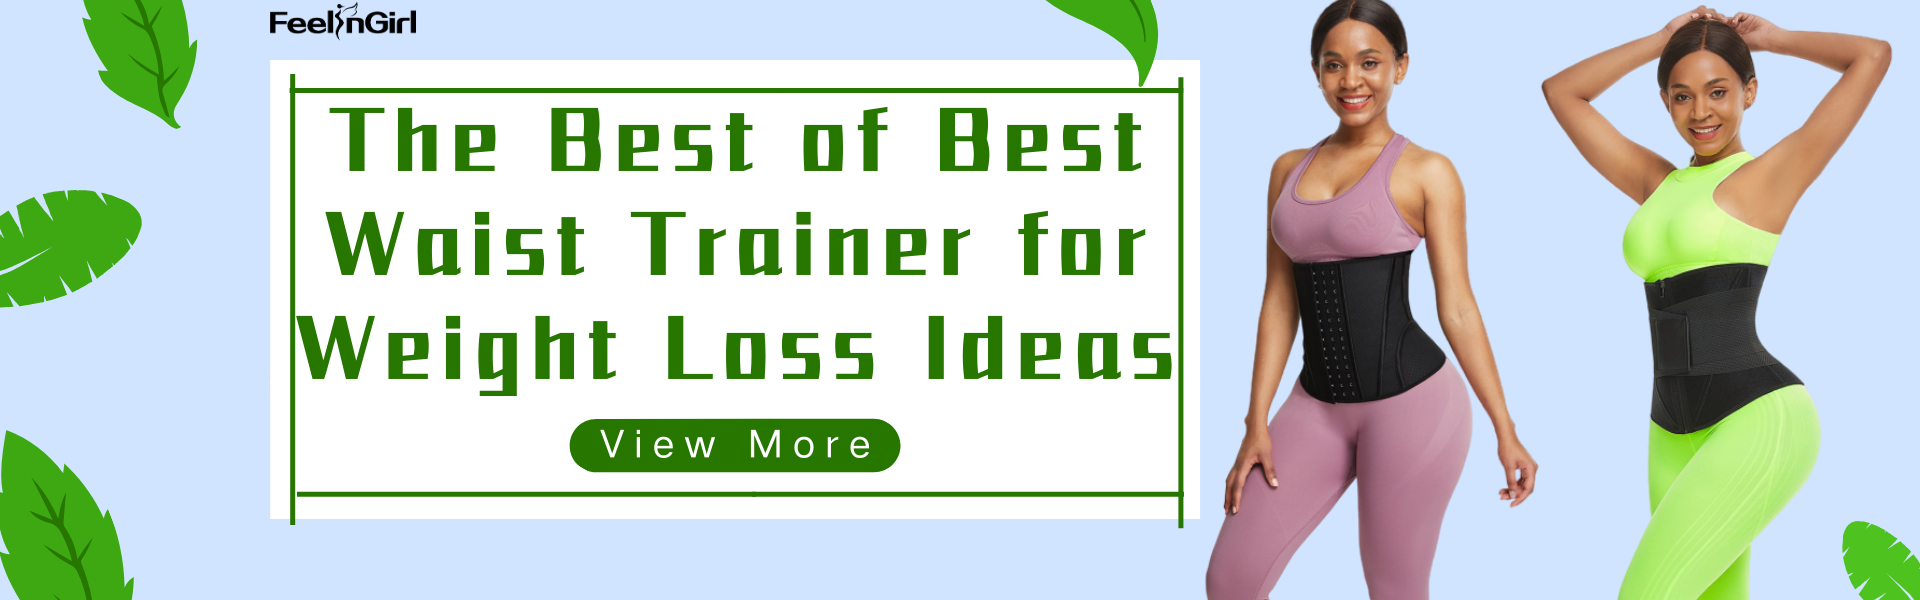 The Best of Best Waist Trainer for Weight Loss Ideas